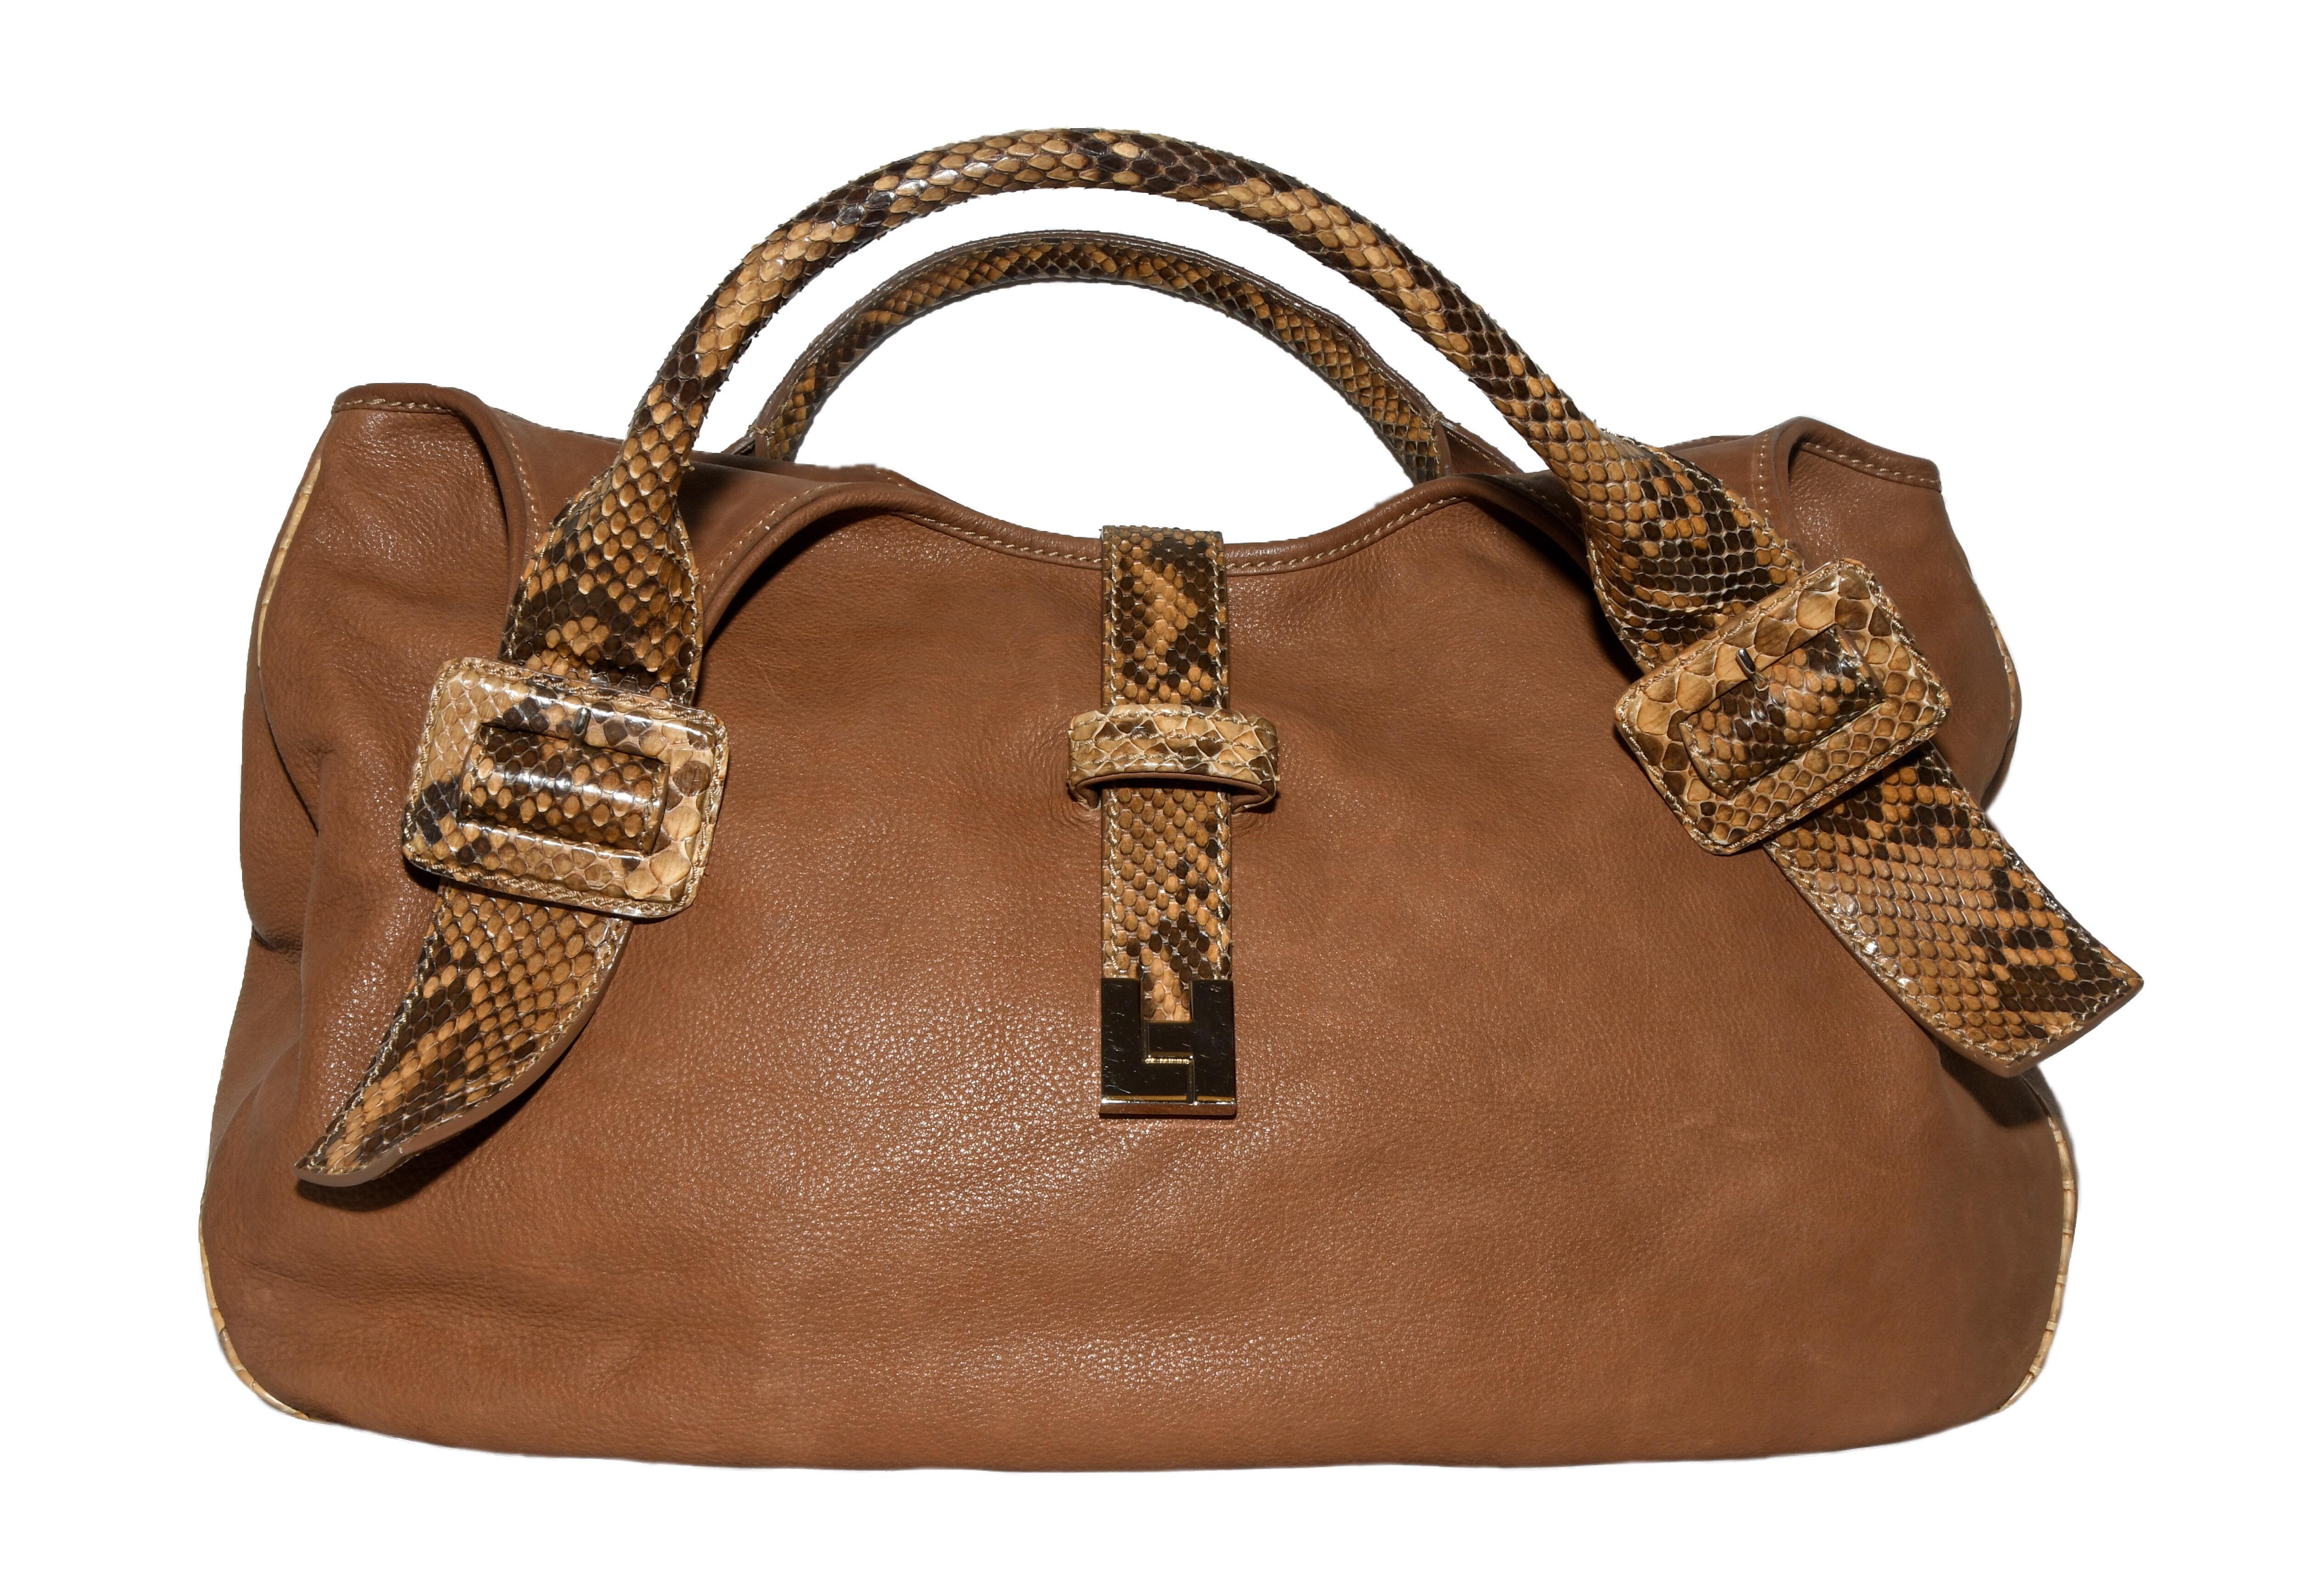 Lambertson Truex New Haven brown leather tote bag features genuine python trim.  With dual rolled handles and closure  strap with palladium LT logo.  Luxury at it's finest.  One large interior opening with azure blue Alacantra lined interior and one